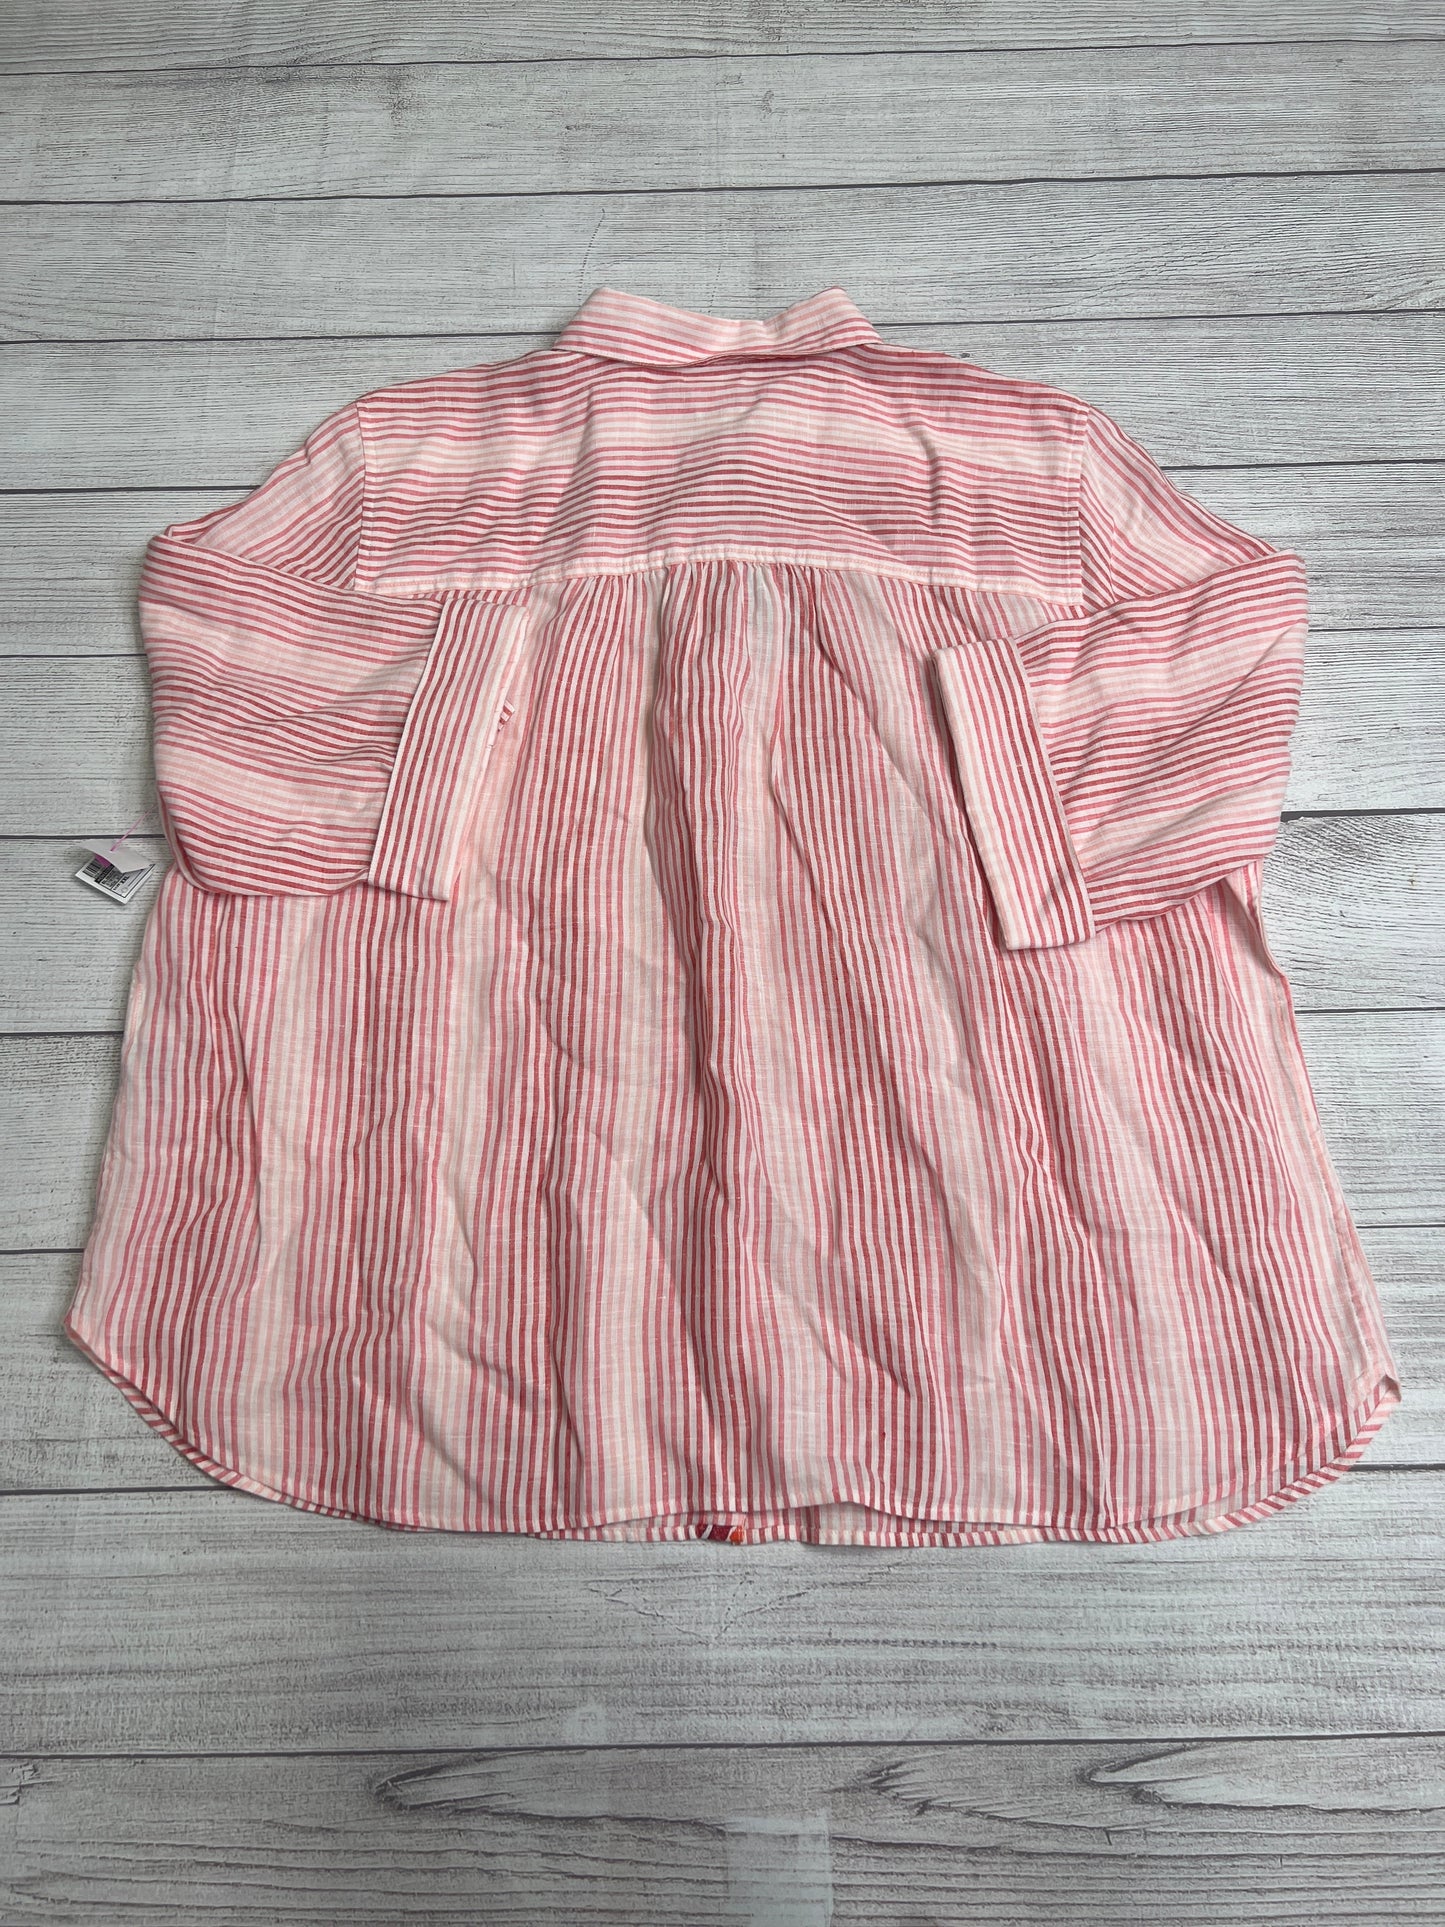 Blouse Long Sleeve By Chicos  Size: Xxl